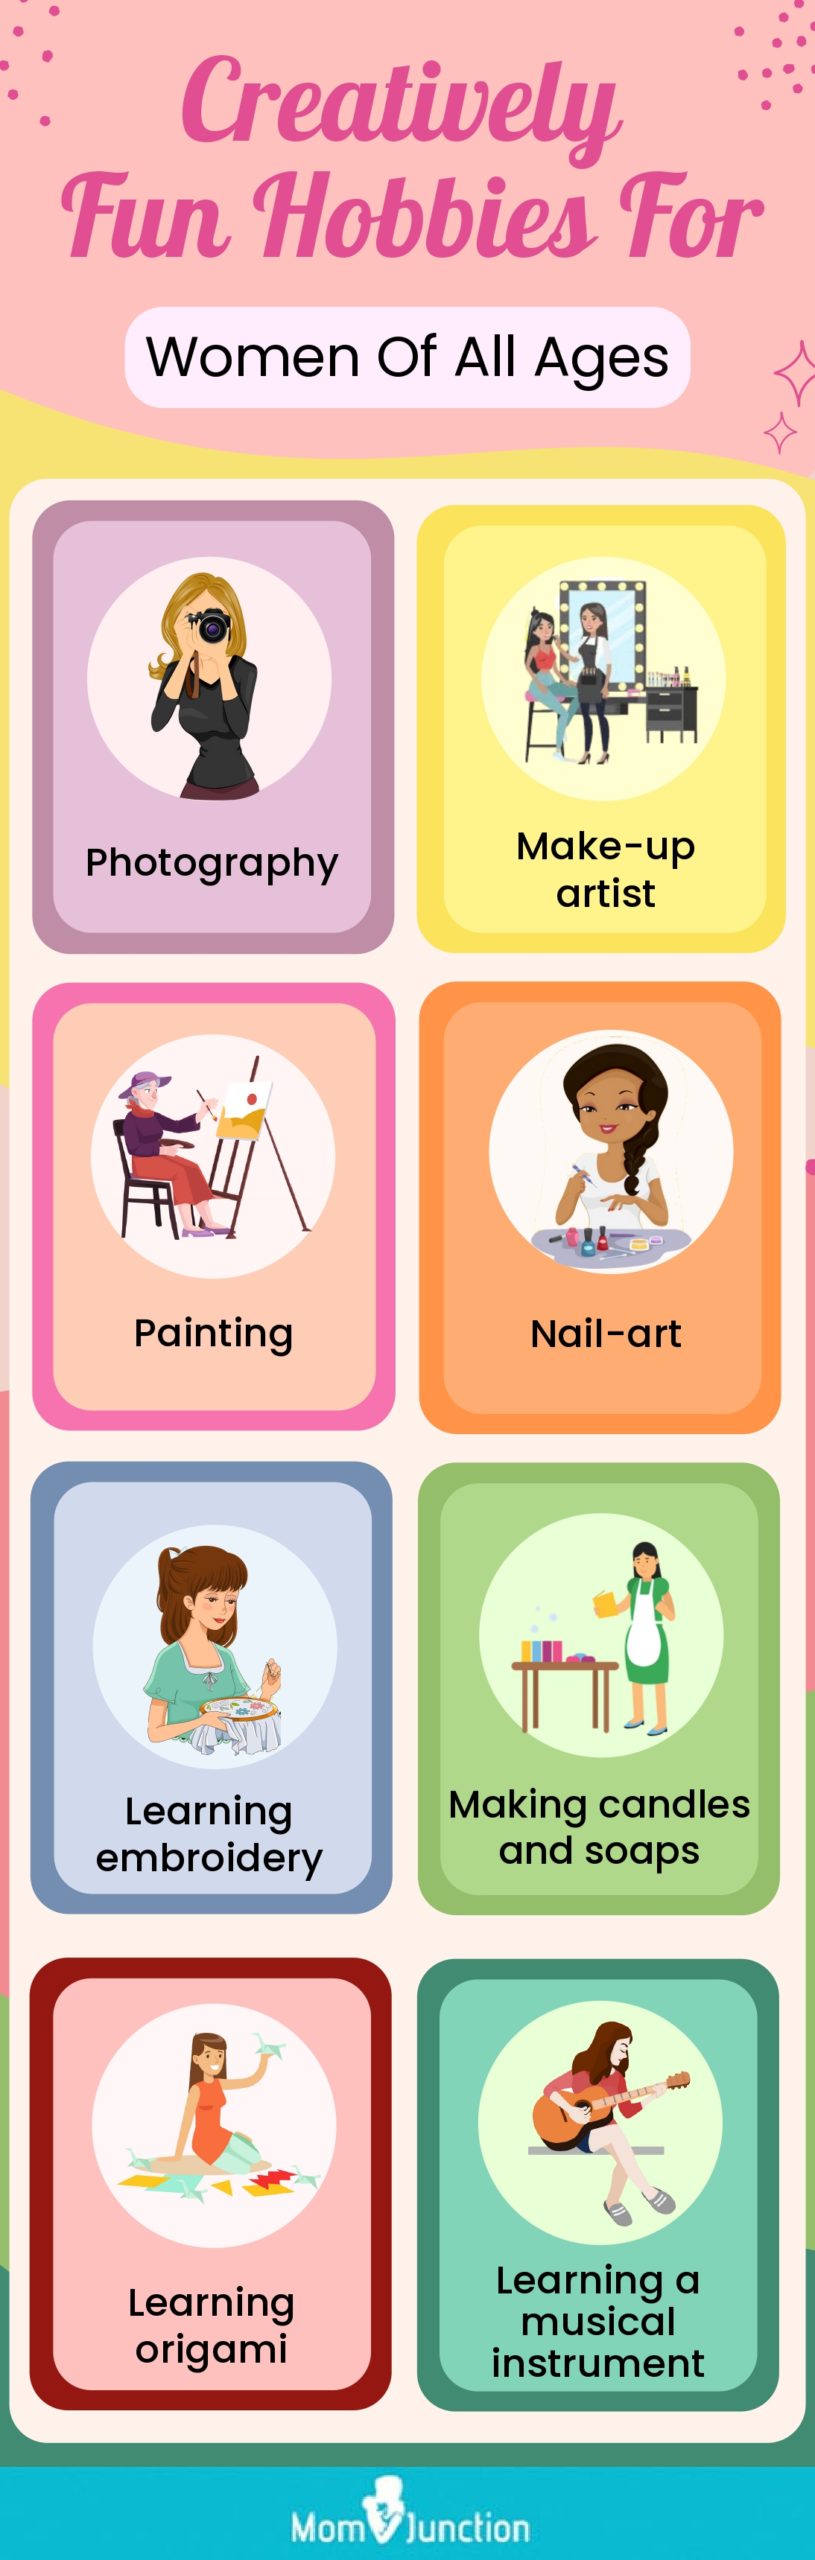 Find Your Passion: 3 Interesting Hobbies for Adults 